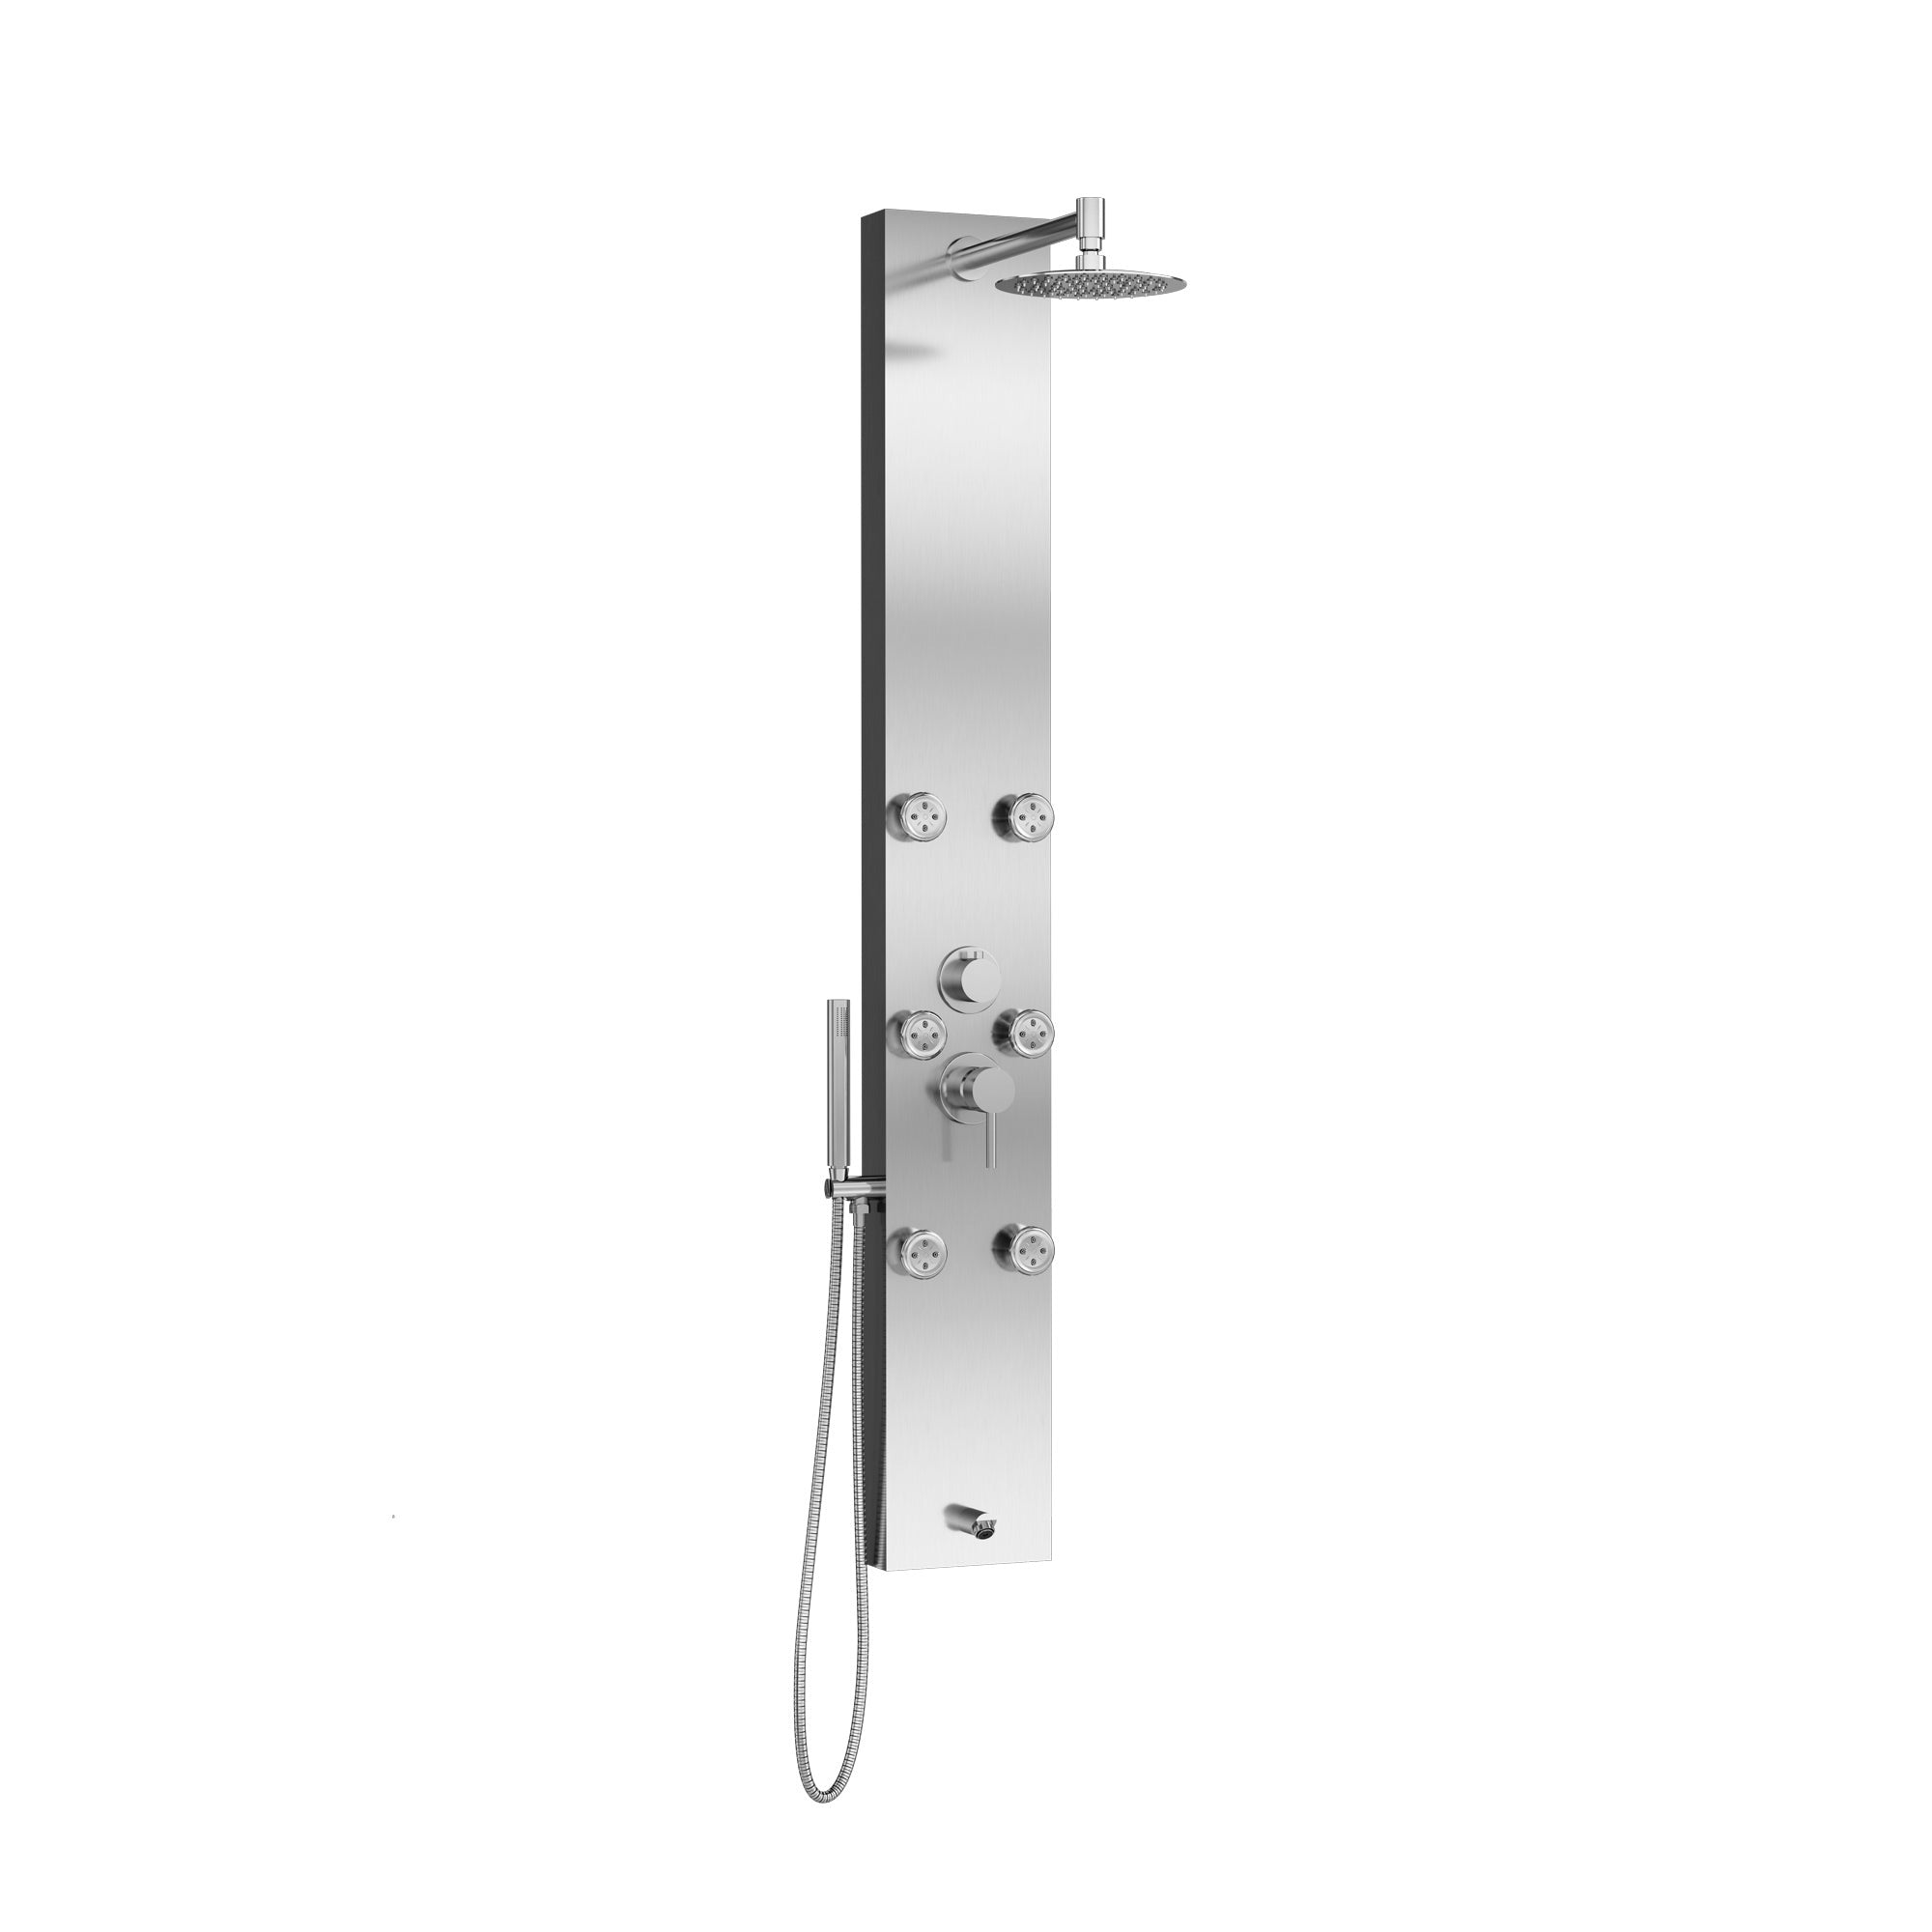 PULSE ShowerSpas Stainless Steel Oil-Rubbed Bronze Shower Panel - Monterey ShowerSpa